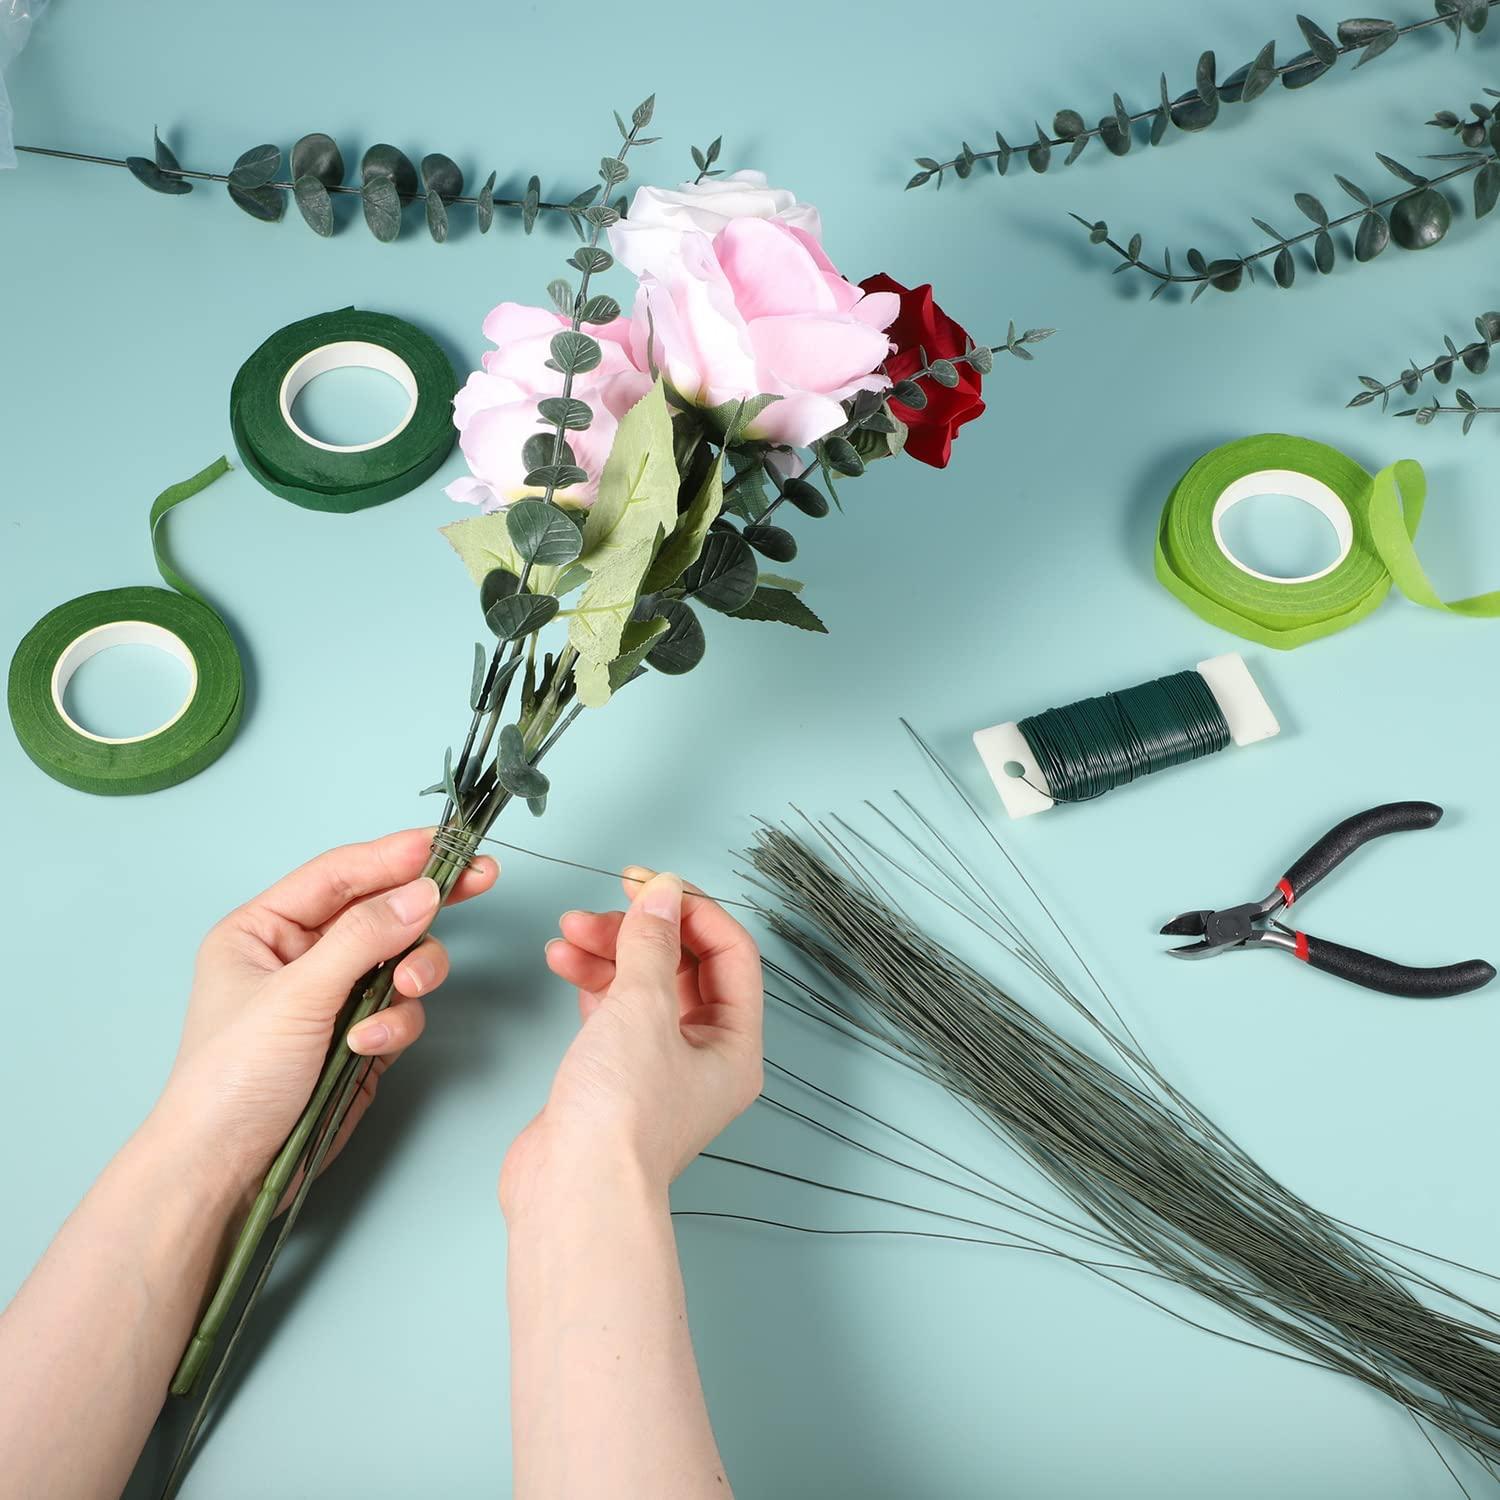 Pengxiaomei Floral Arrangement Kit Floral Tape and Floral Wire with Cutter Green  Floral Tape 22 Guage Floral Stem Wire 26 Gauge Green Floral Wire for  Bouquet Stem Wrap Florist Wreath Making Supplies